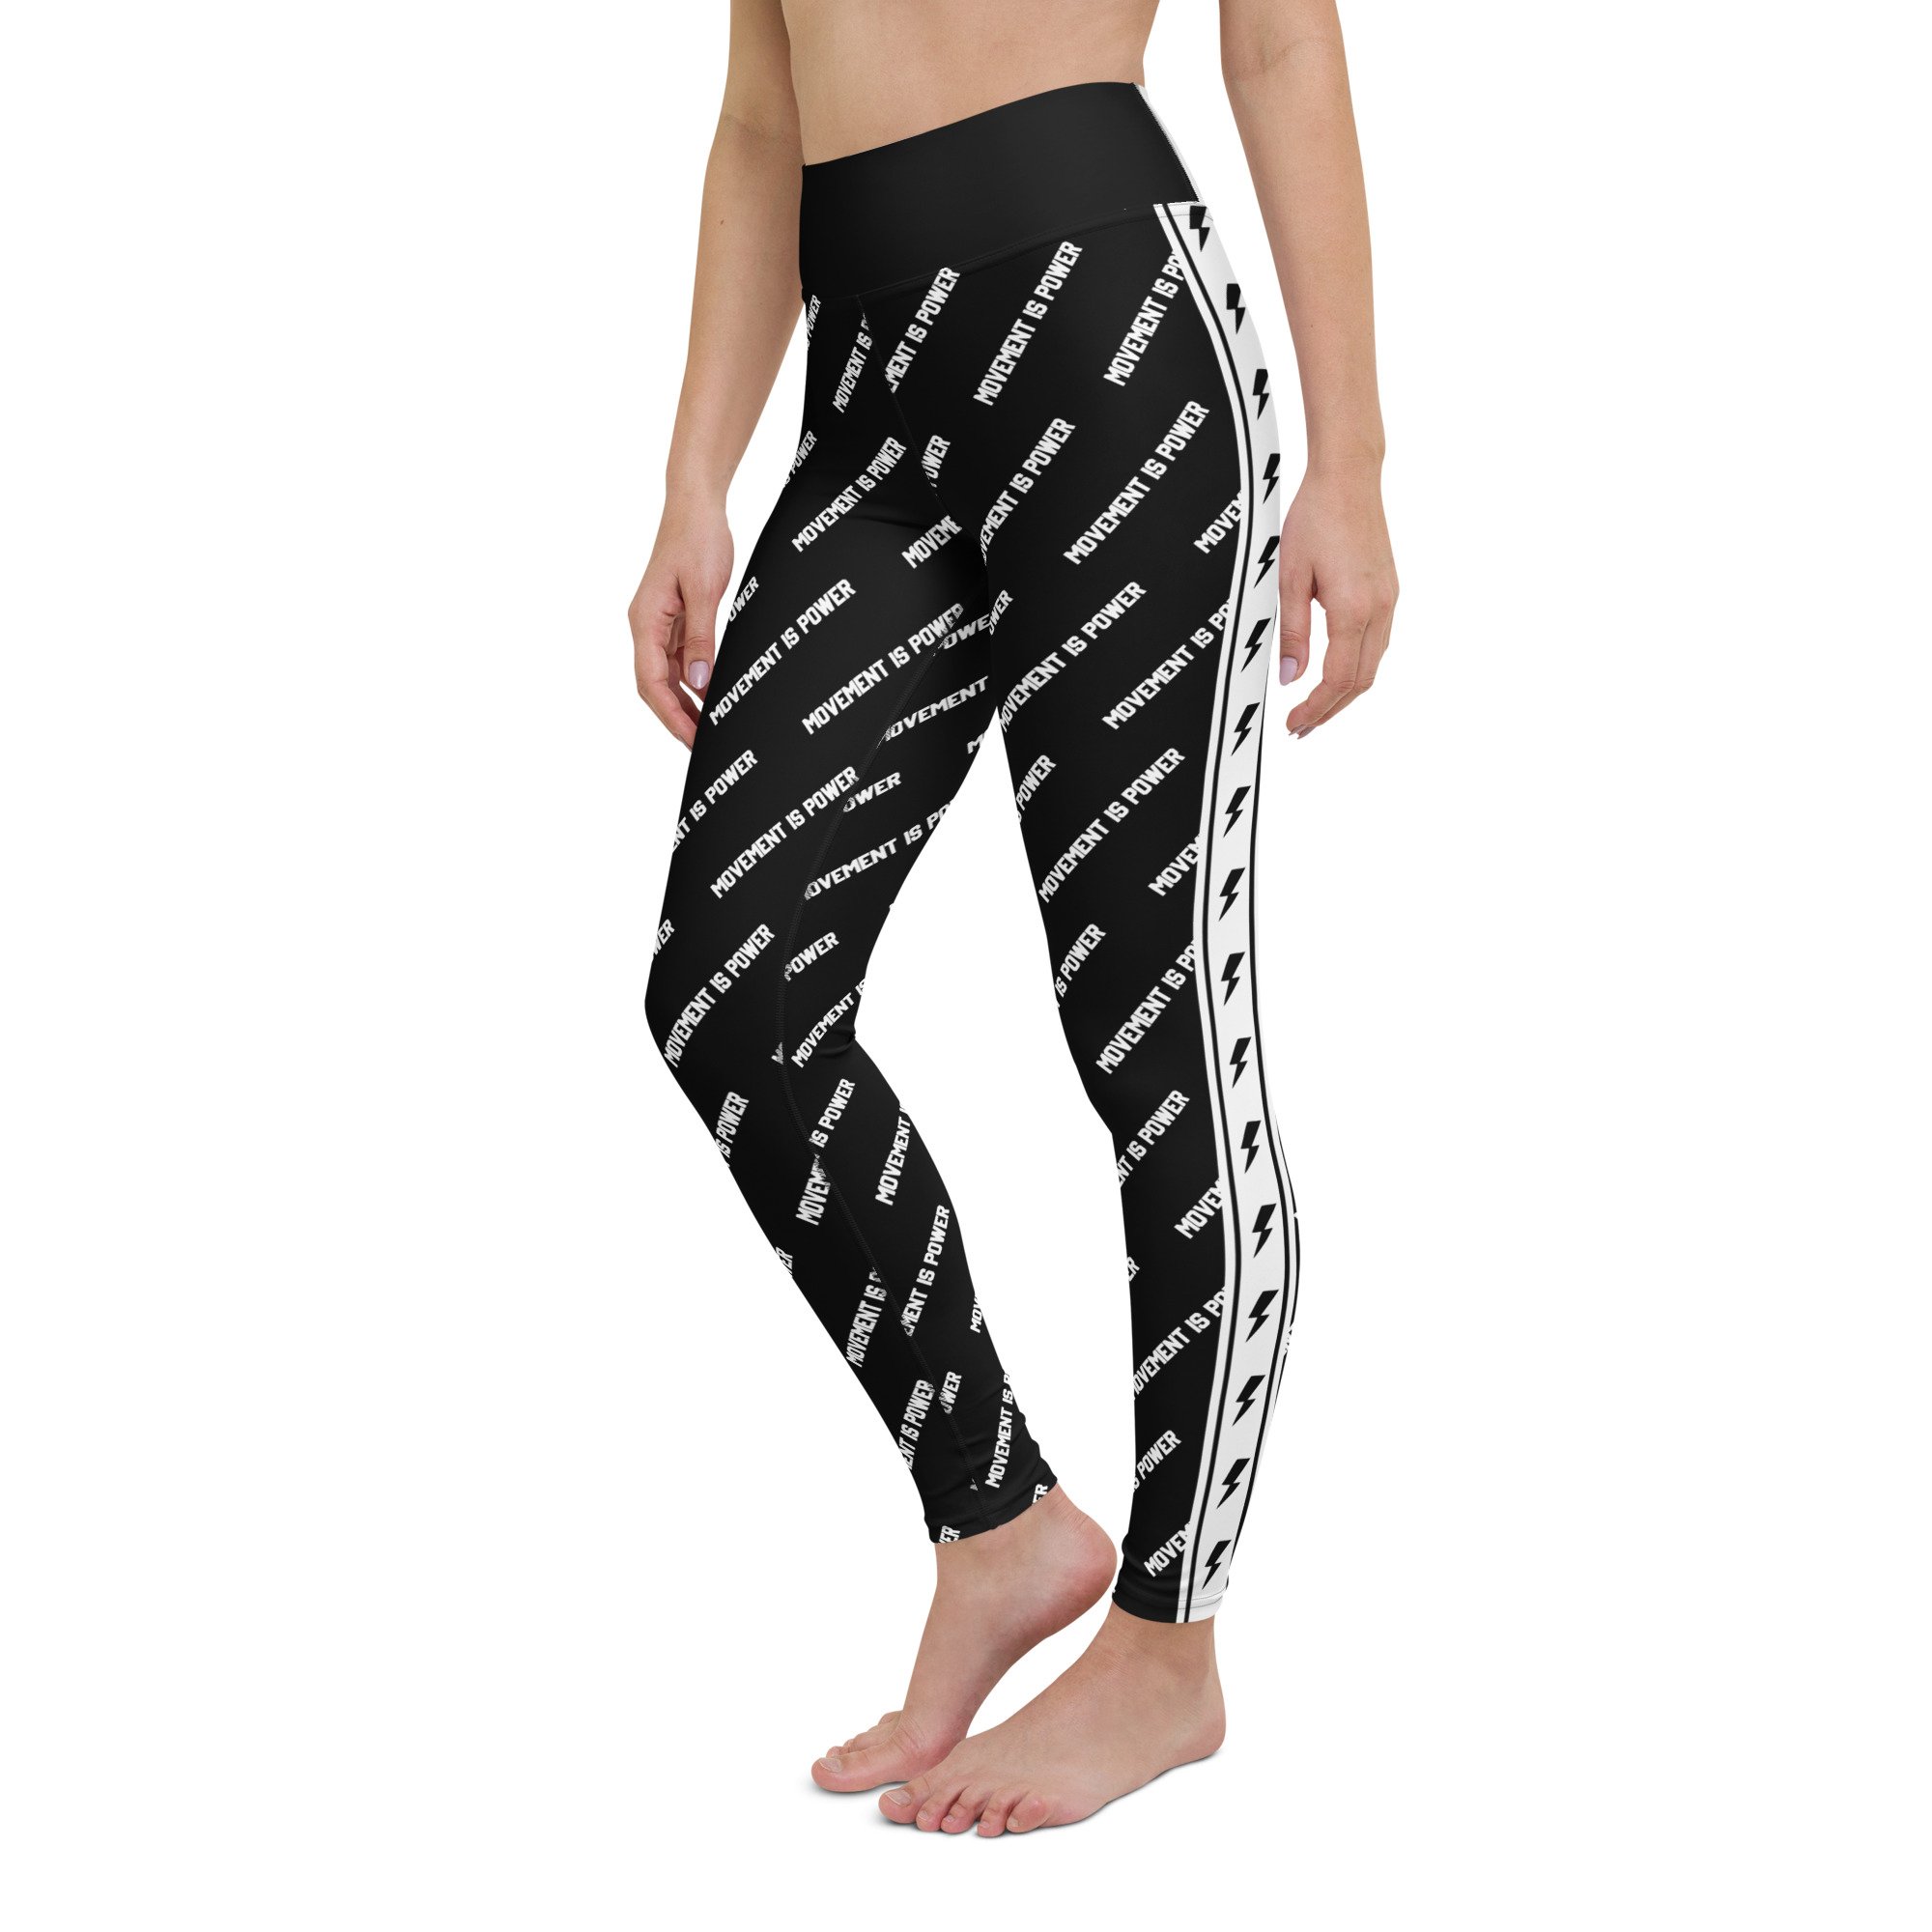 Women's Buttery Soft Activewear Leggings (Medium only) - Wholesale -  Yelete.com